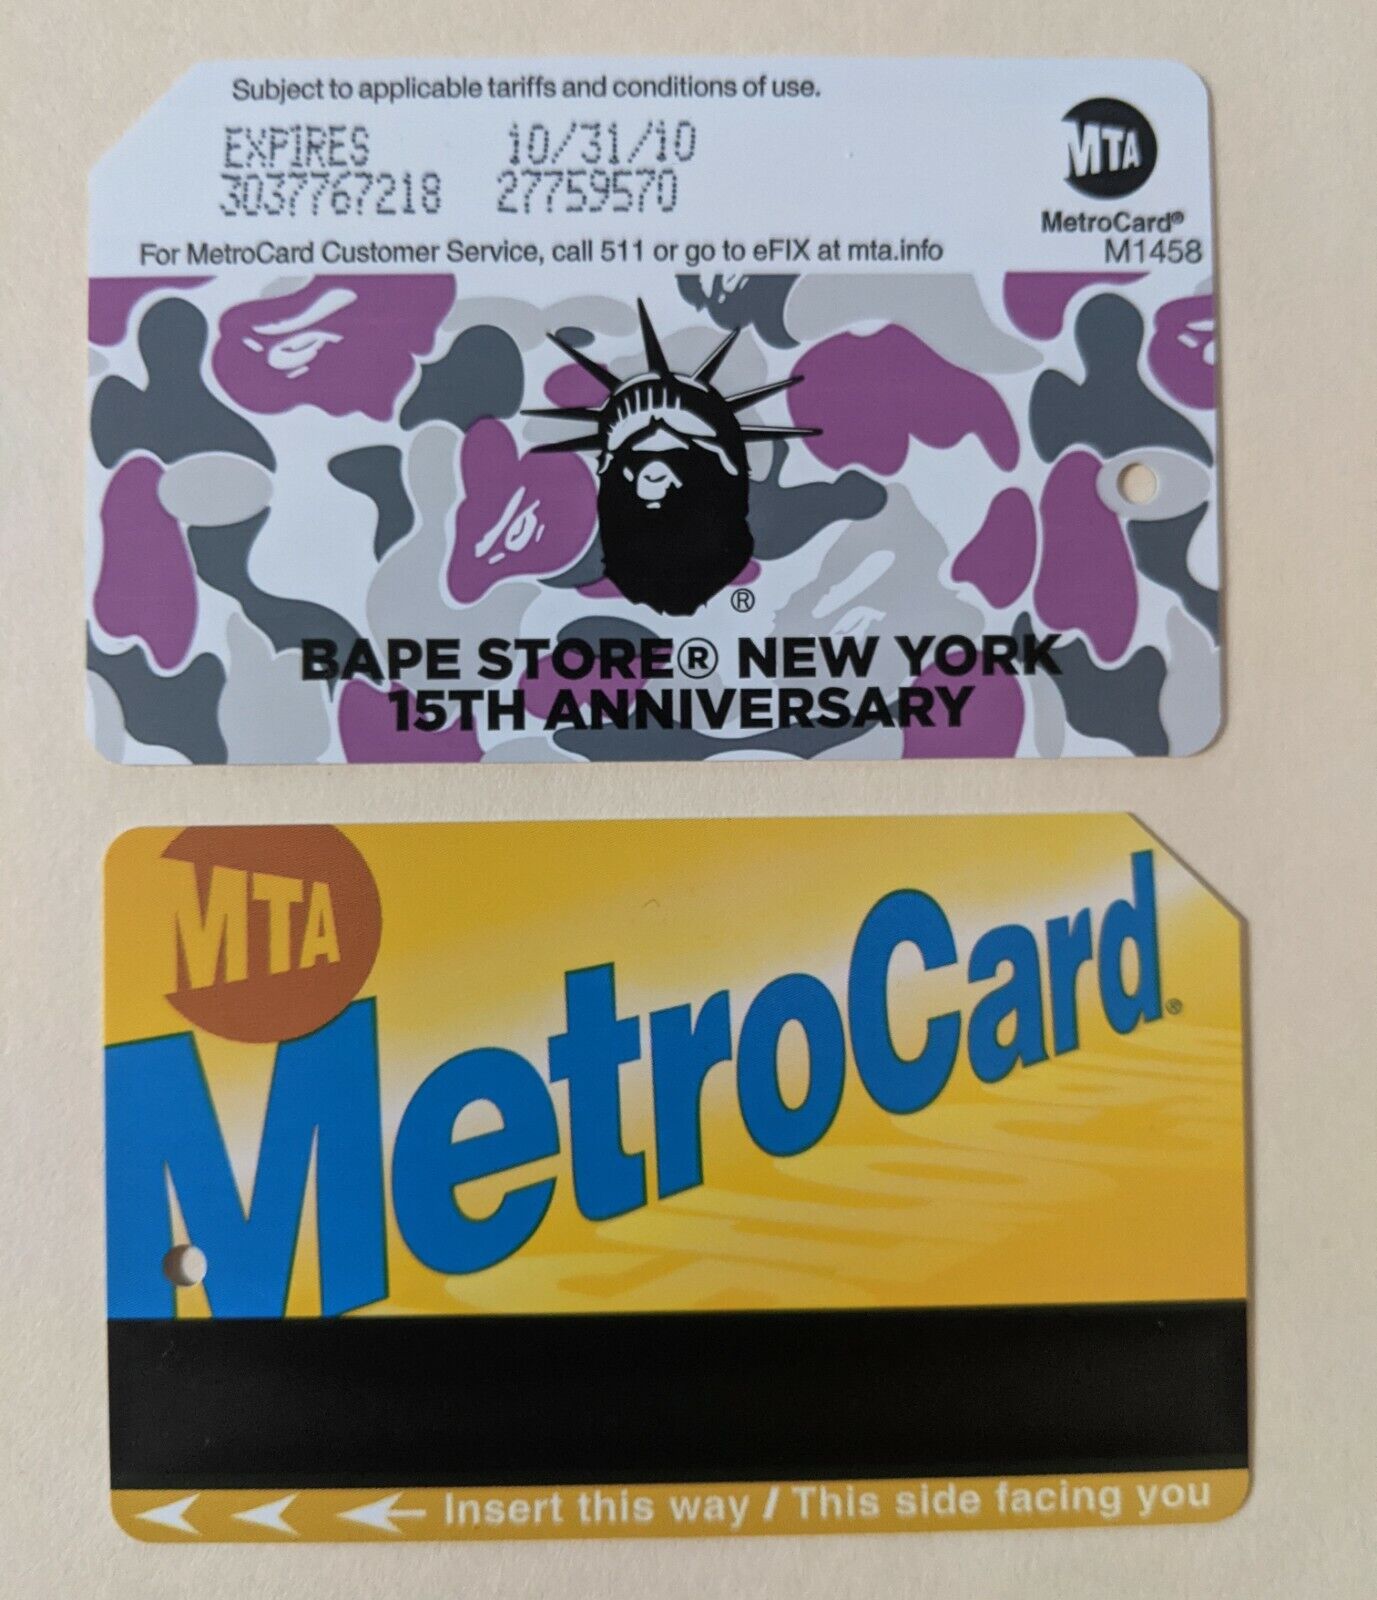 BAPE NYC MetroCard Never Used-Expired, Mint Condition